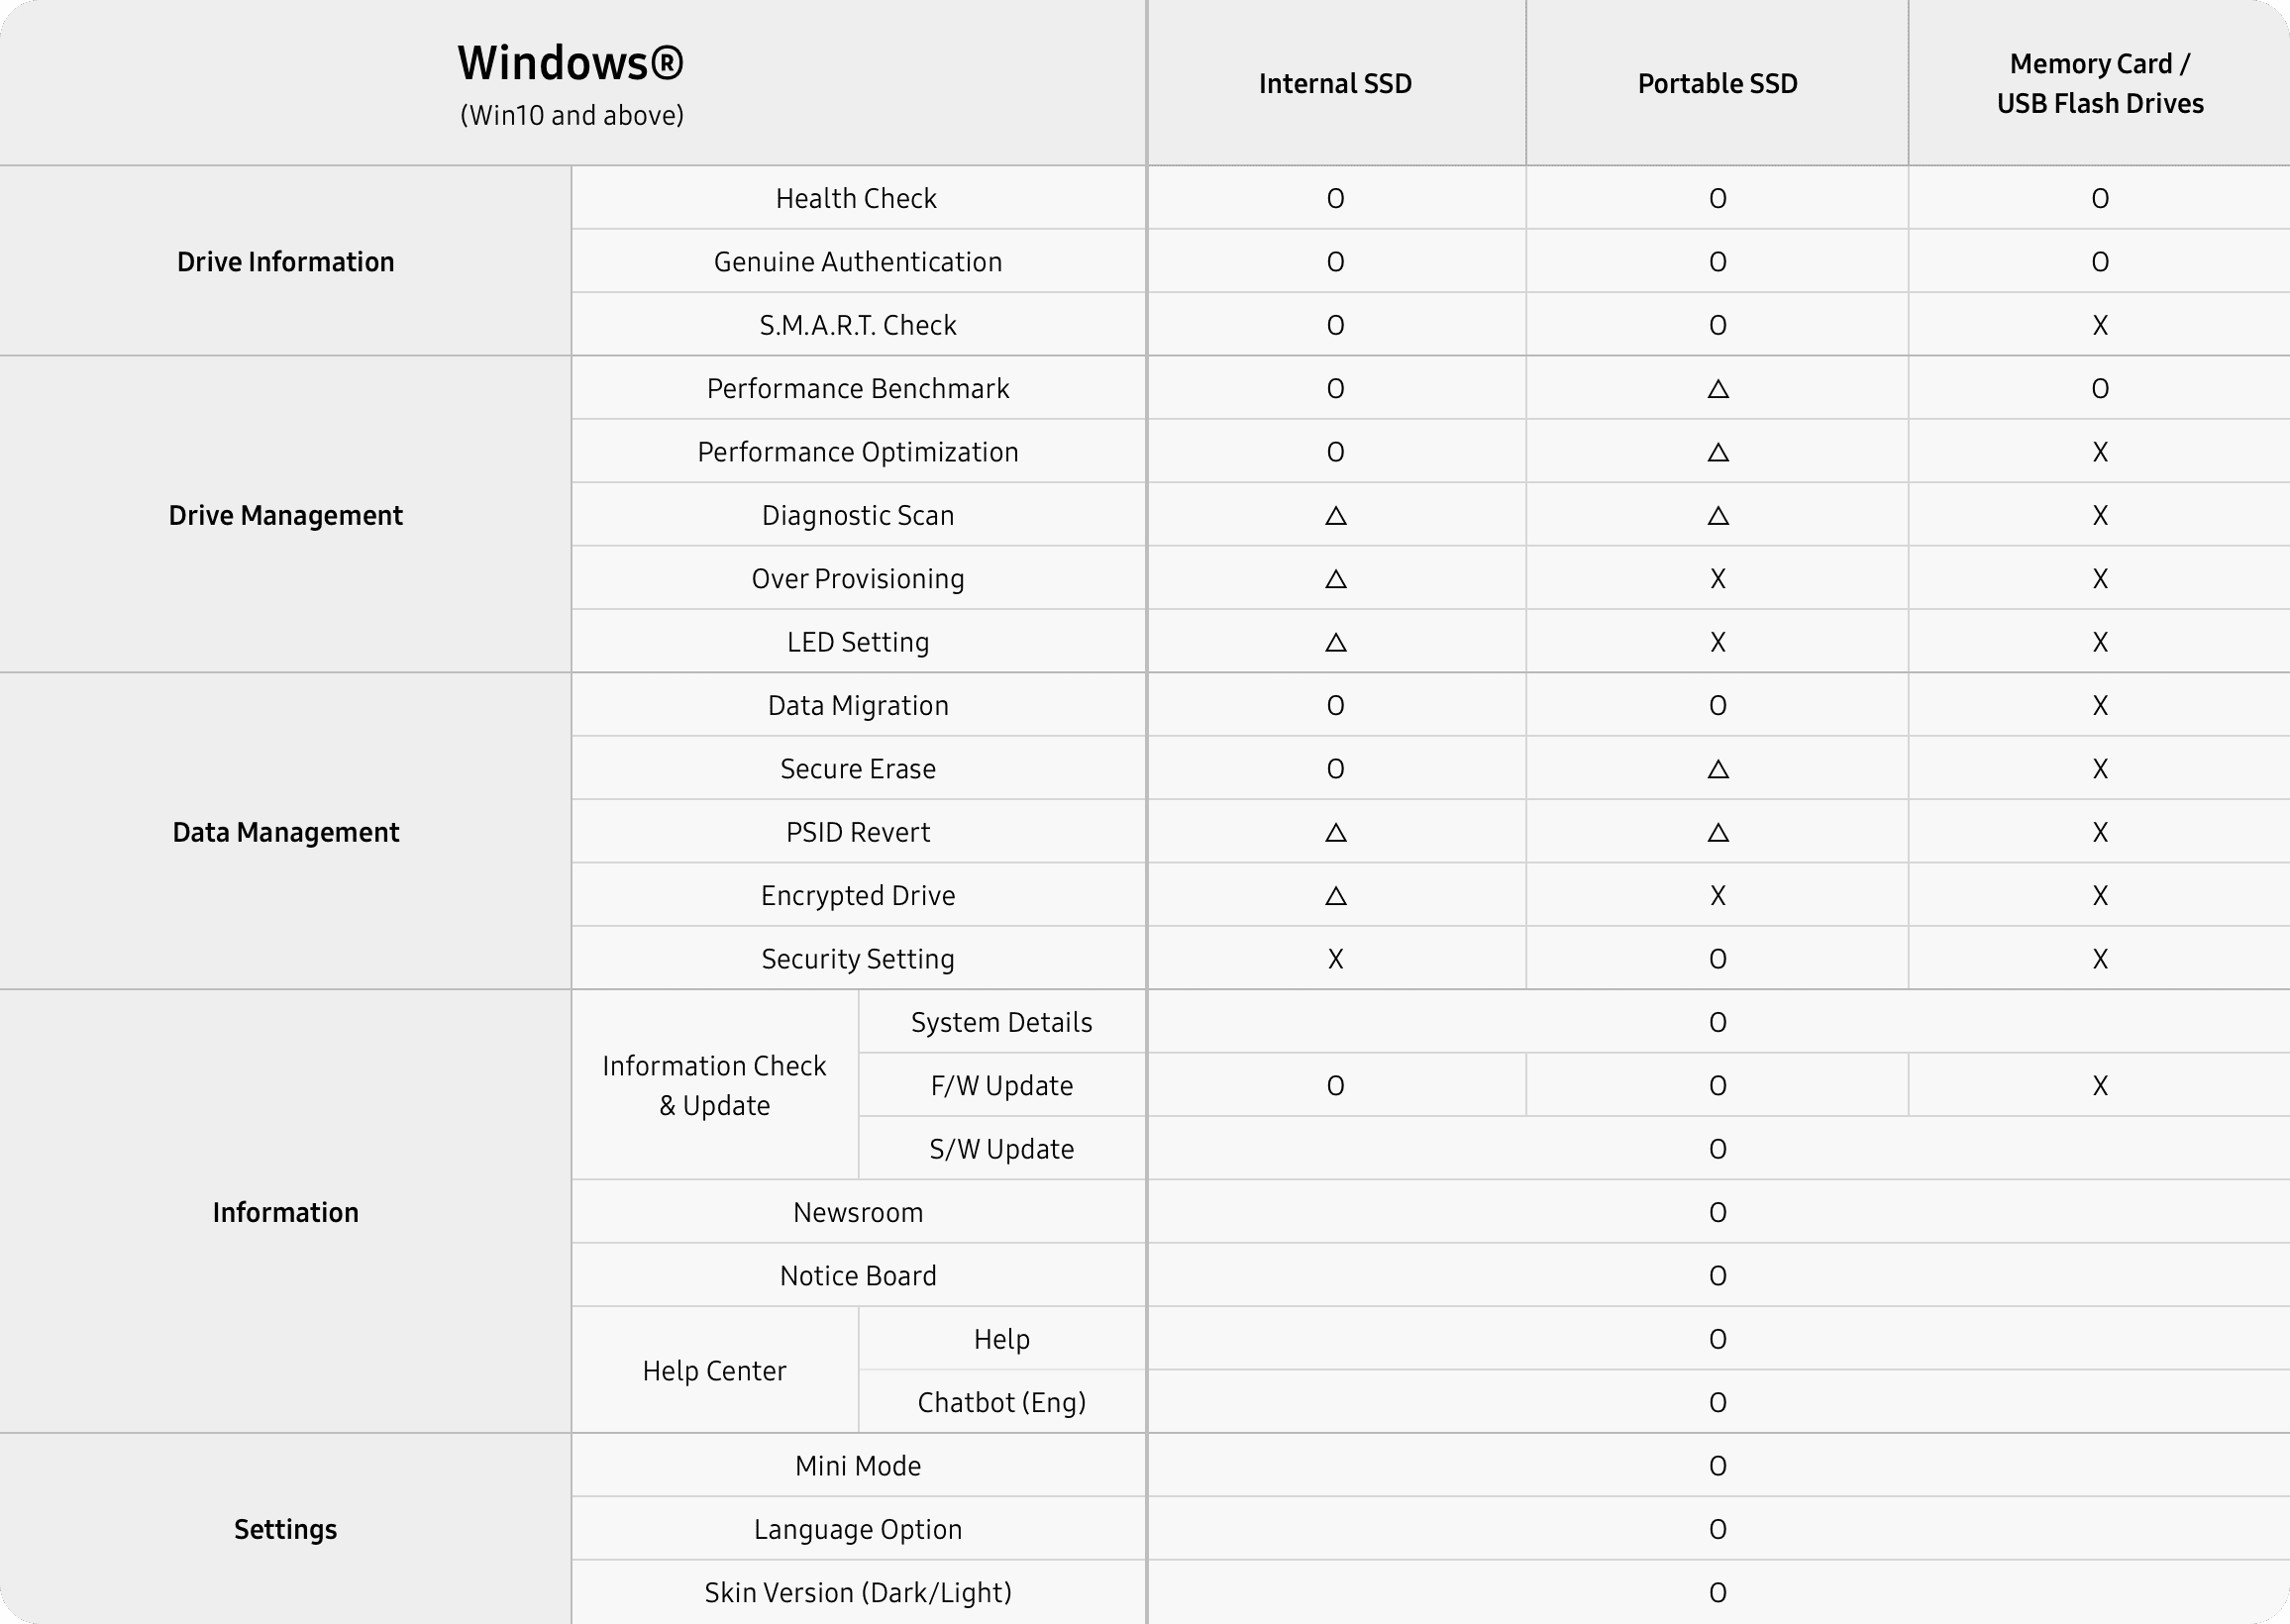 Comparison table of Windows operating system compatibility features for Samsung brand memory products (internal SSDs, portable SSDs, memory cards, USB flash drives) compatible with Samsung Magician.